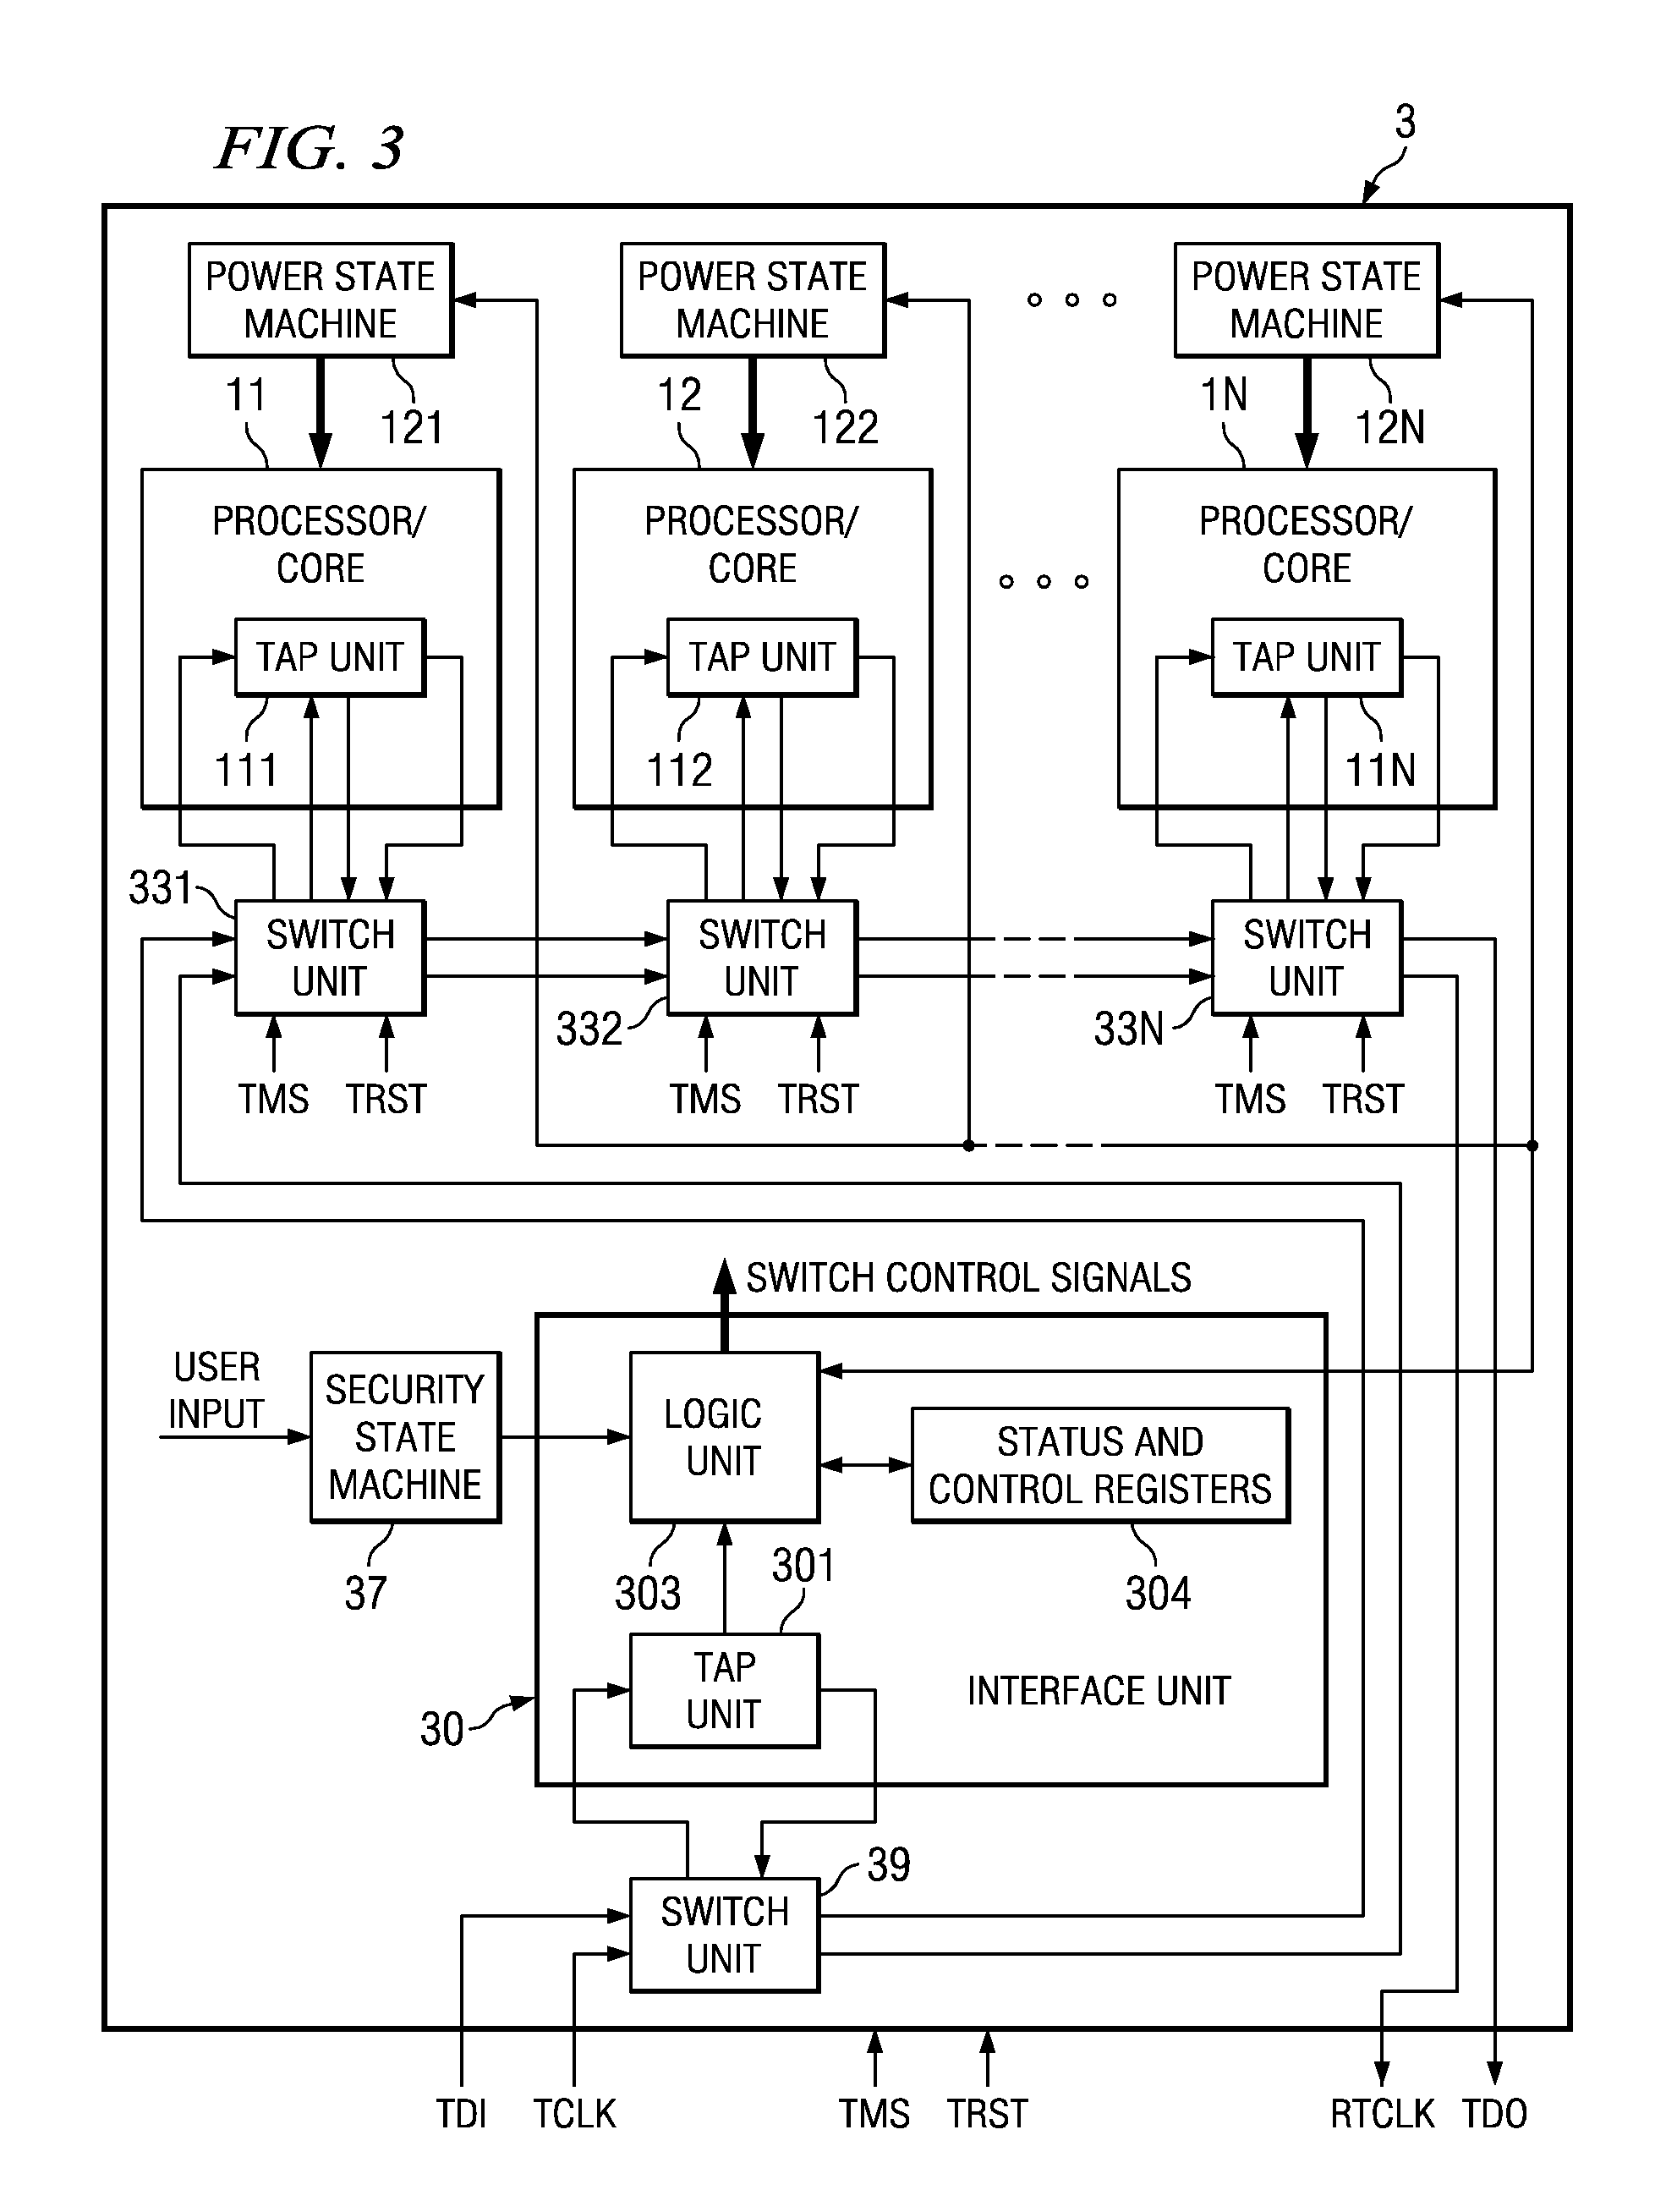 Apparatus and method for test and debug of a processor/core having advanced power management